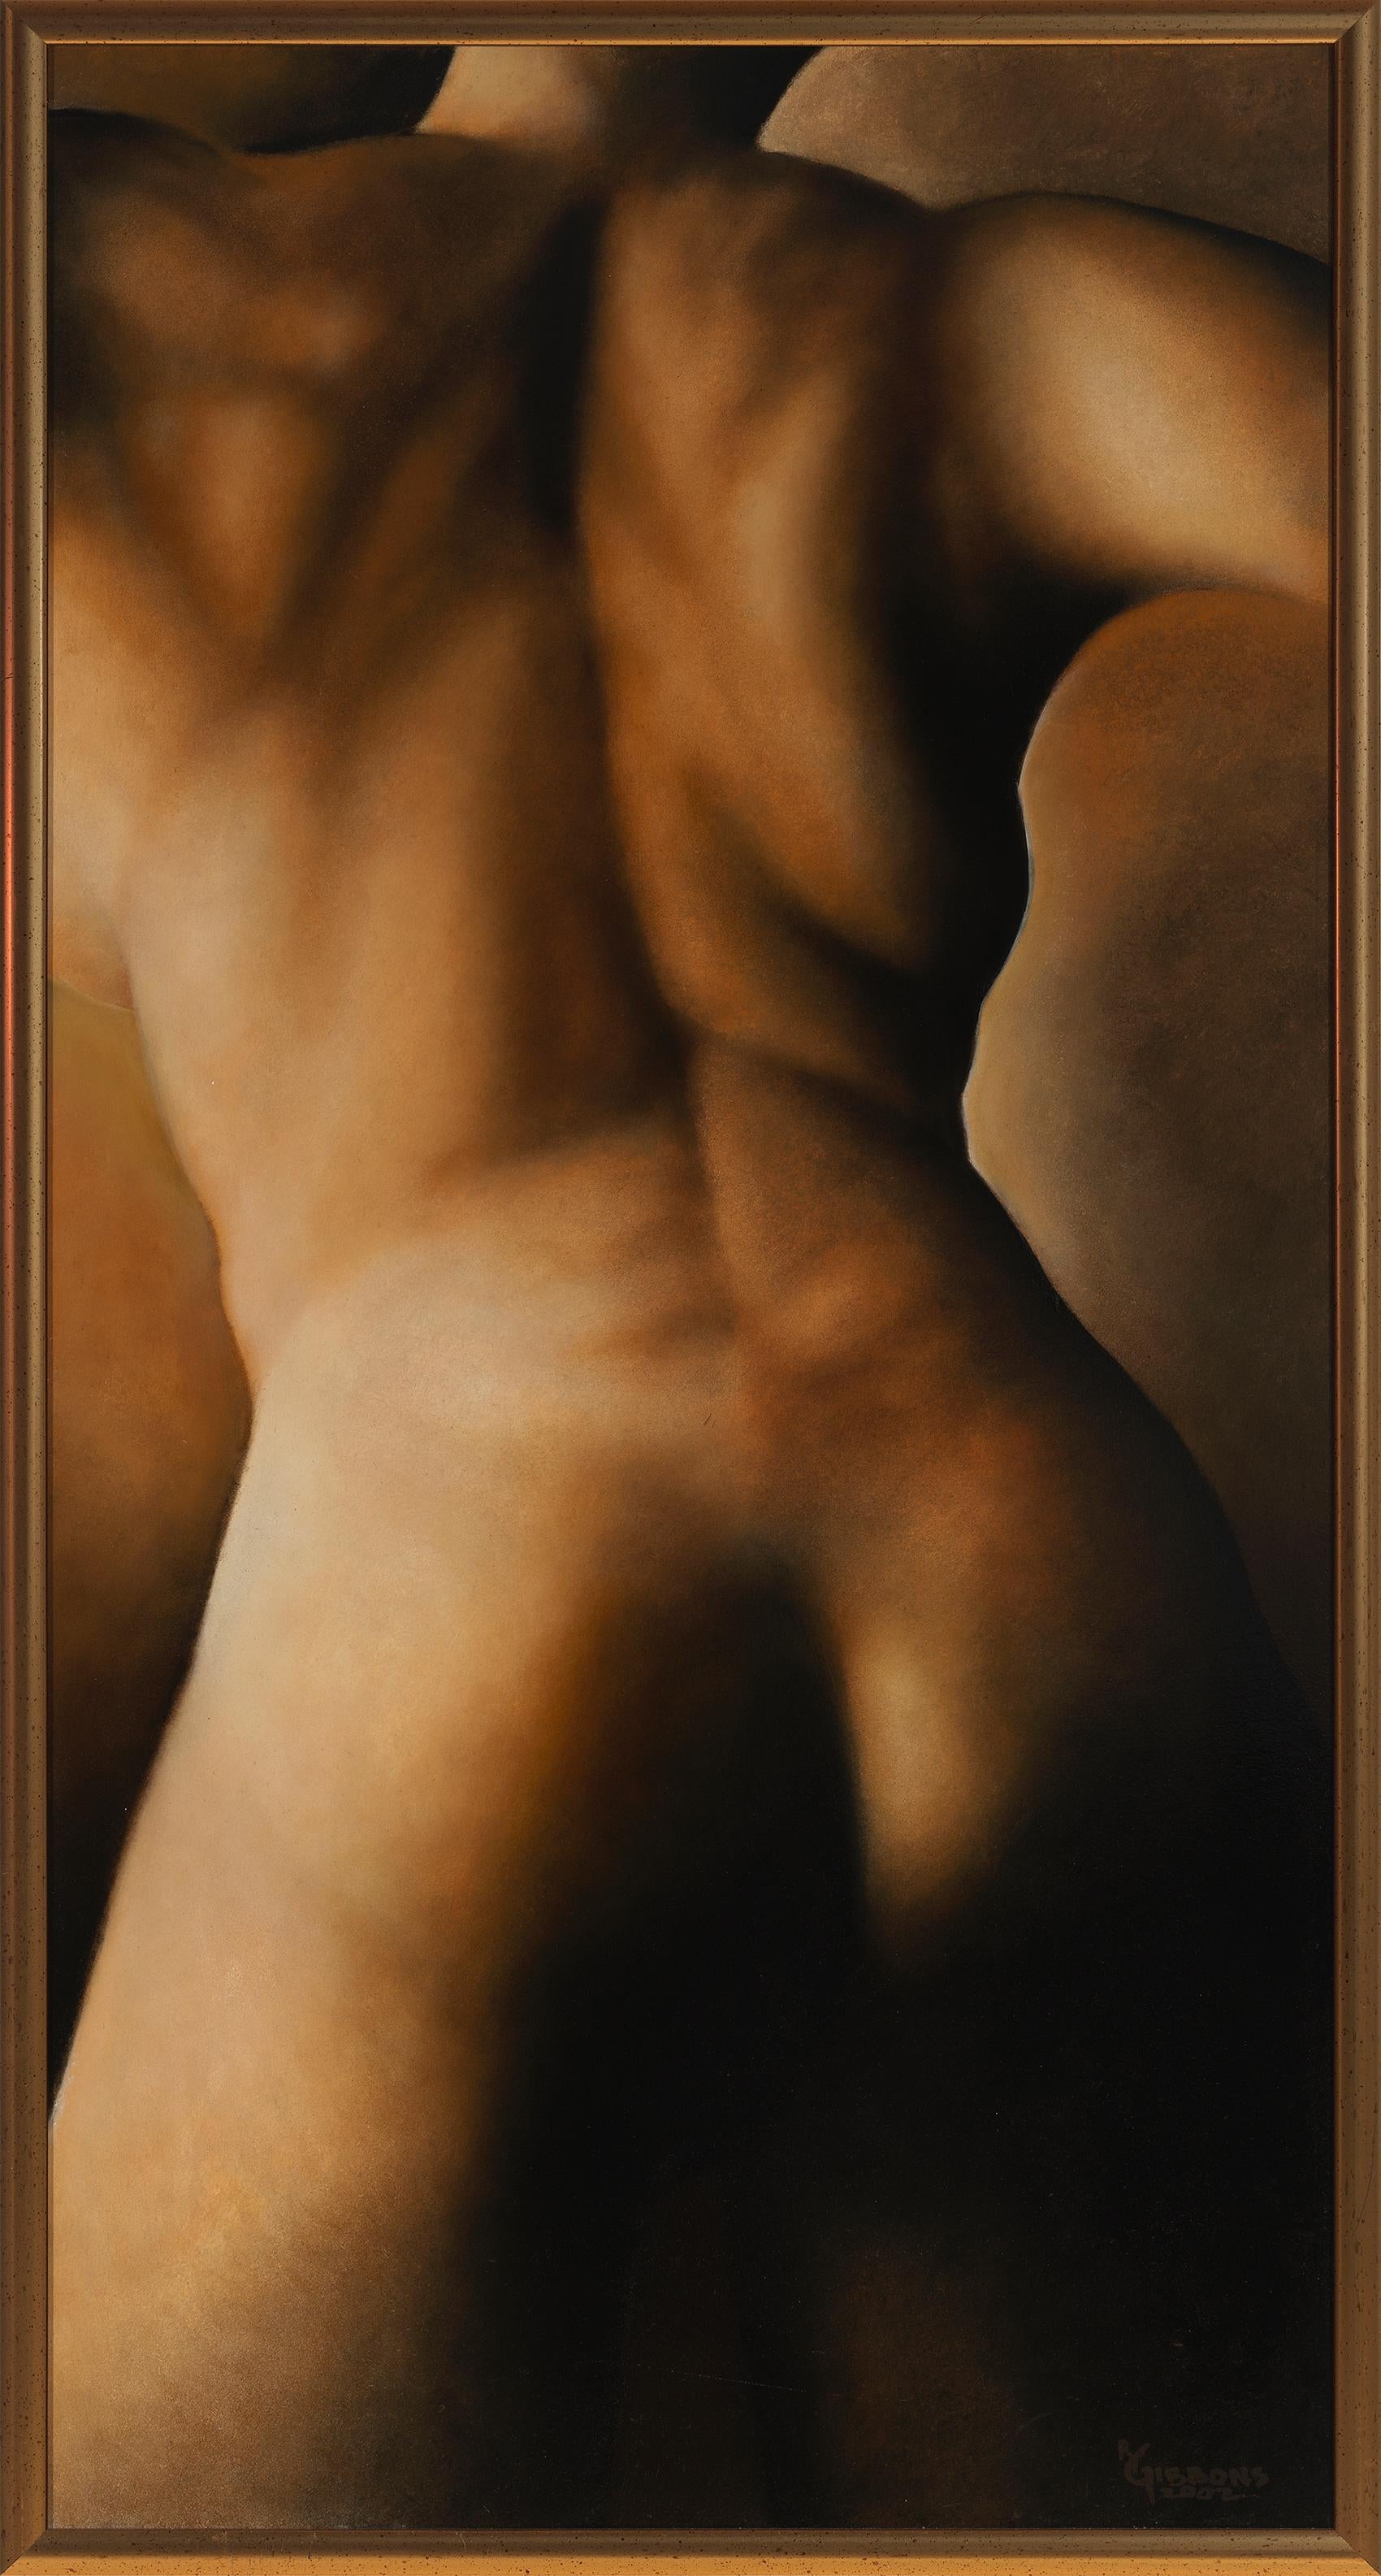 Richard Gibbons Figurative Painting - Movement (#172) - Original Oil Painting of Nude Female Back in Warm Skin Tones